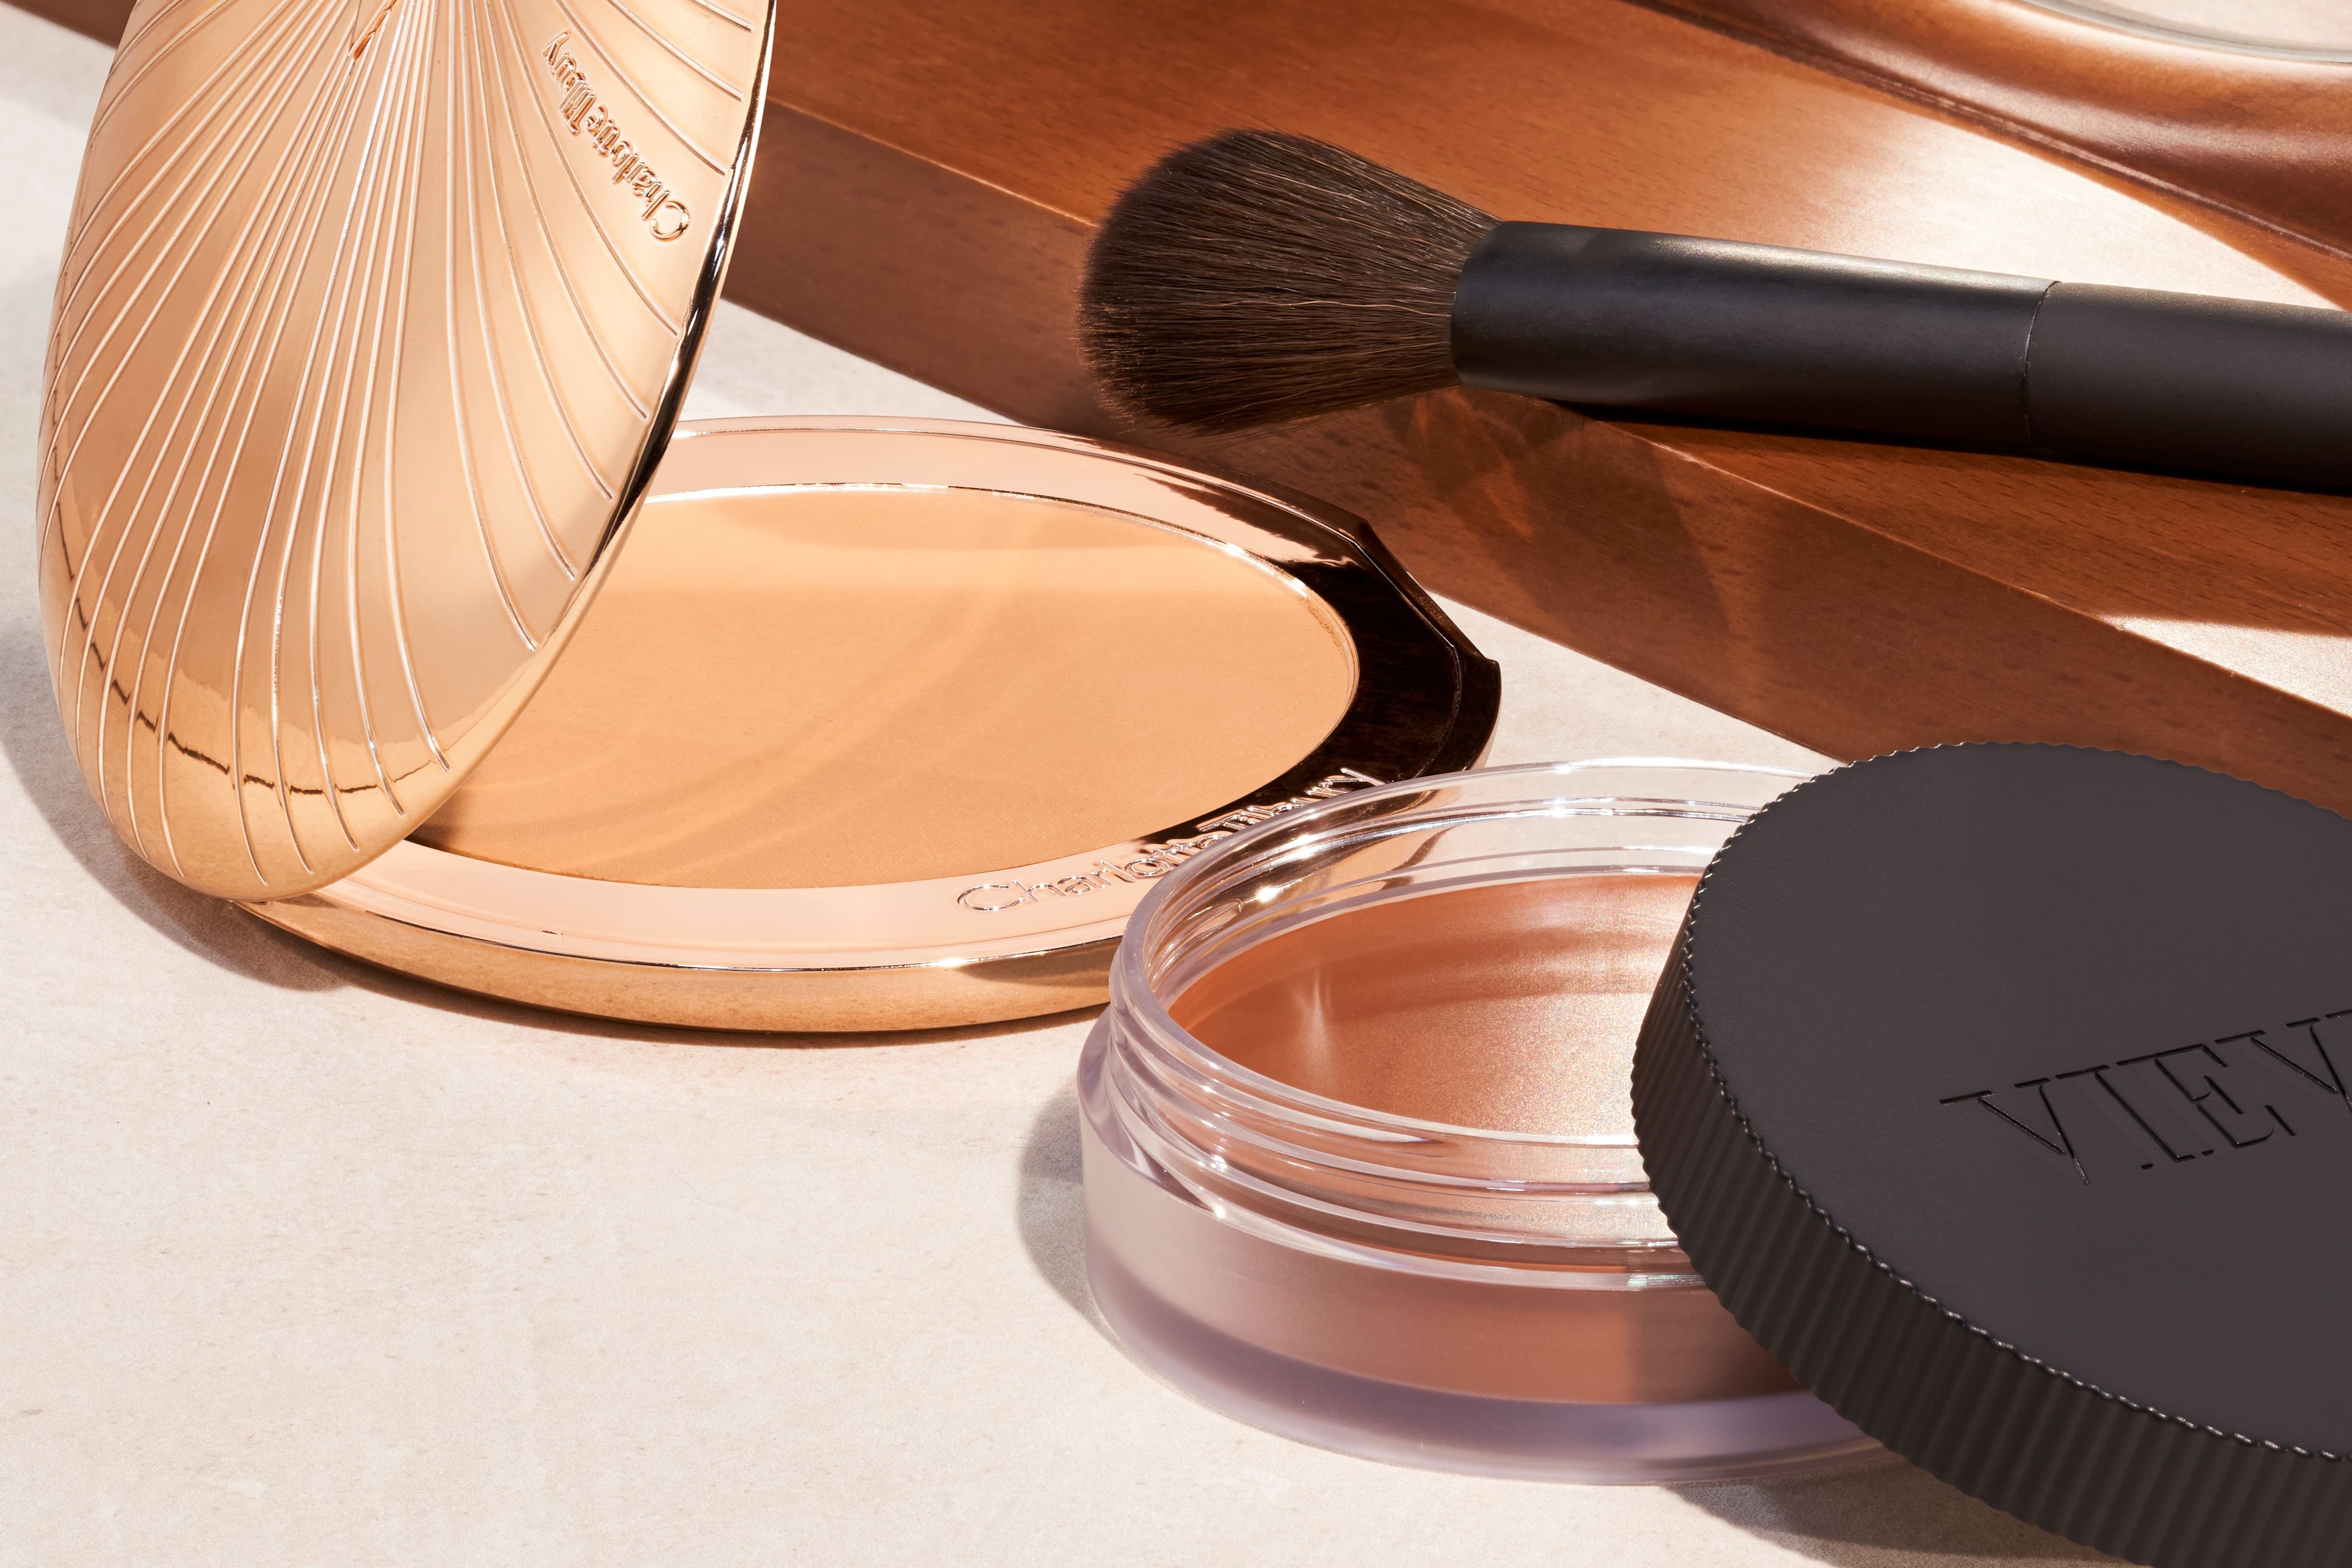 The Best Cream Bronzers for Fair Skin - The Beauty Minimalist